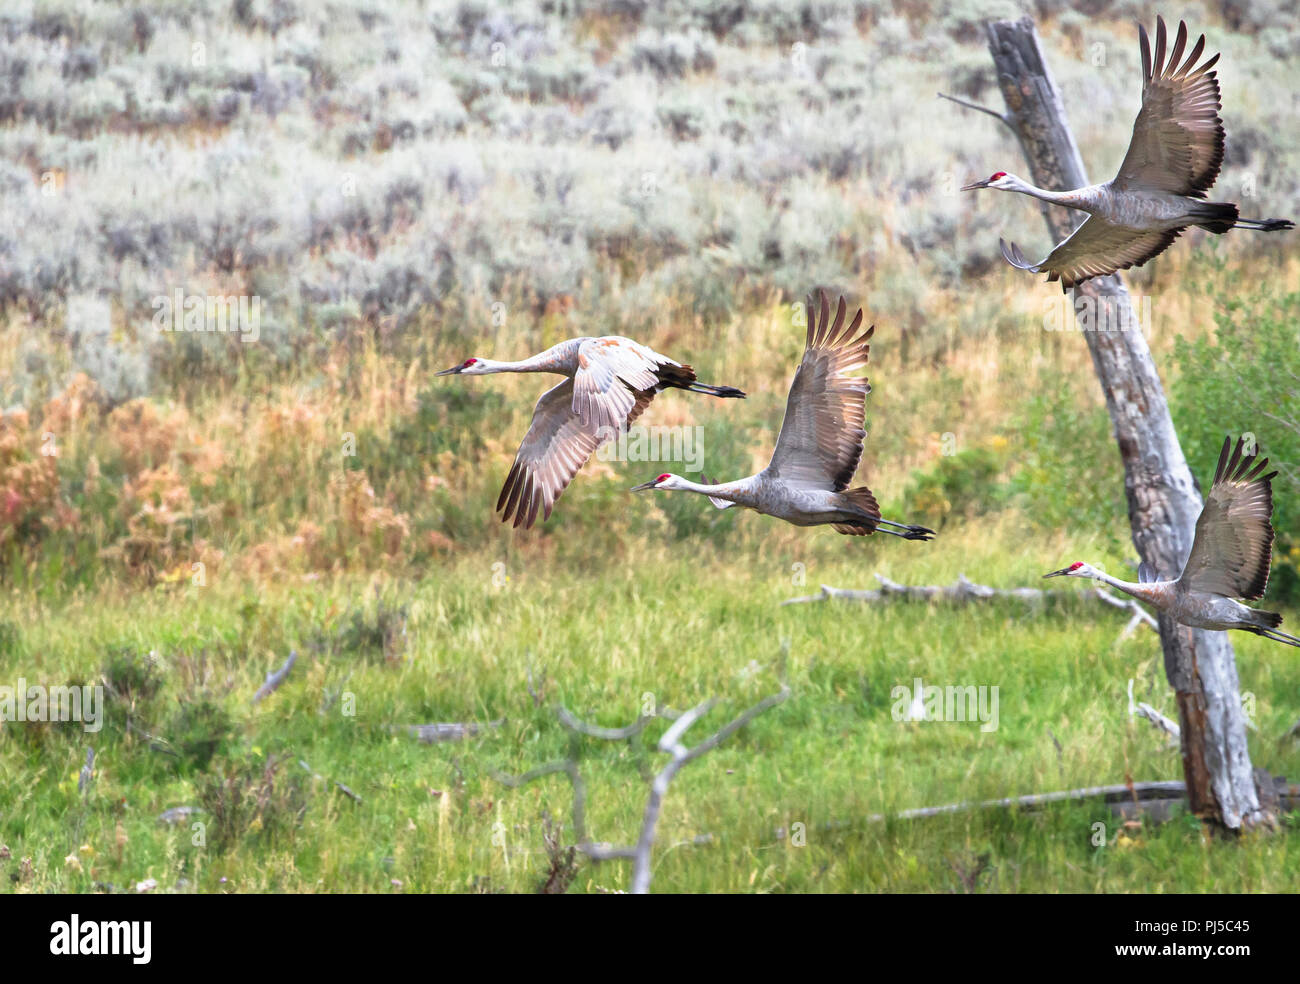 A flock of sandhill cranes (Grus canadensis) flies above a grassy field in Yellowstone National Park, Wyoming. Stock Photo